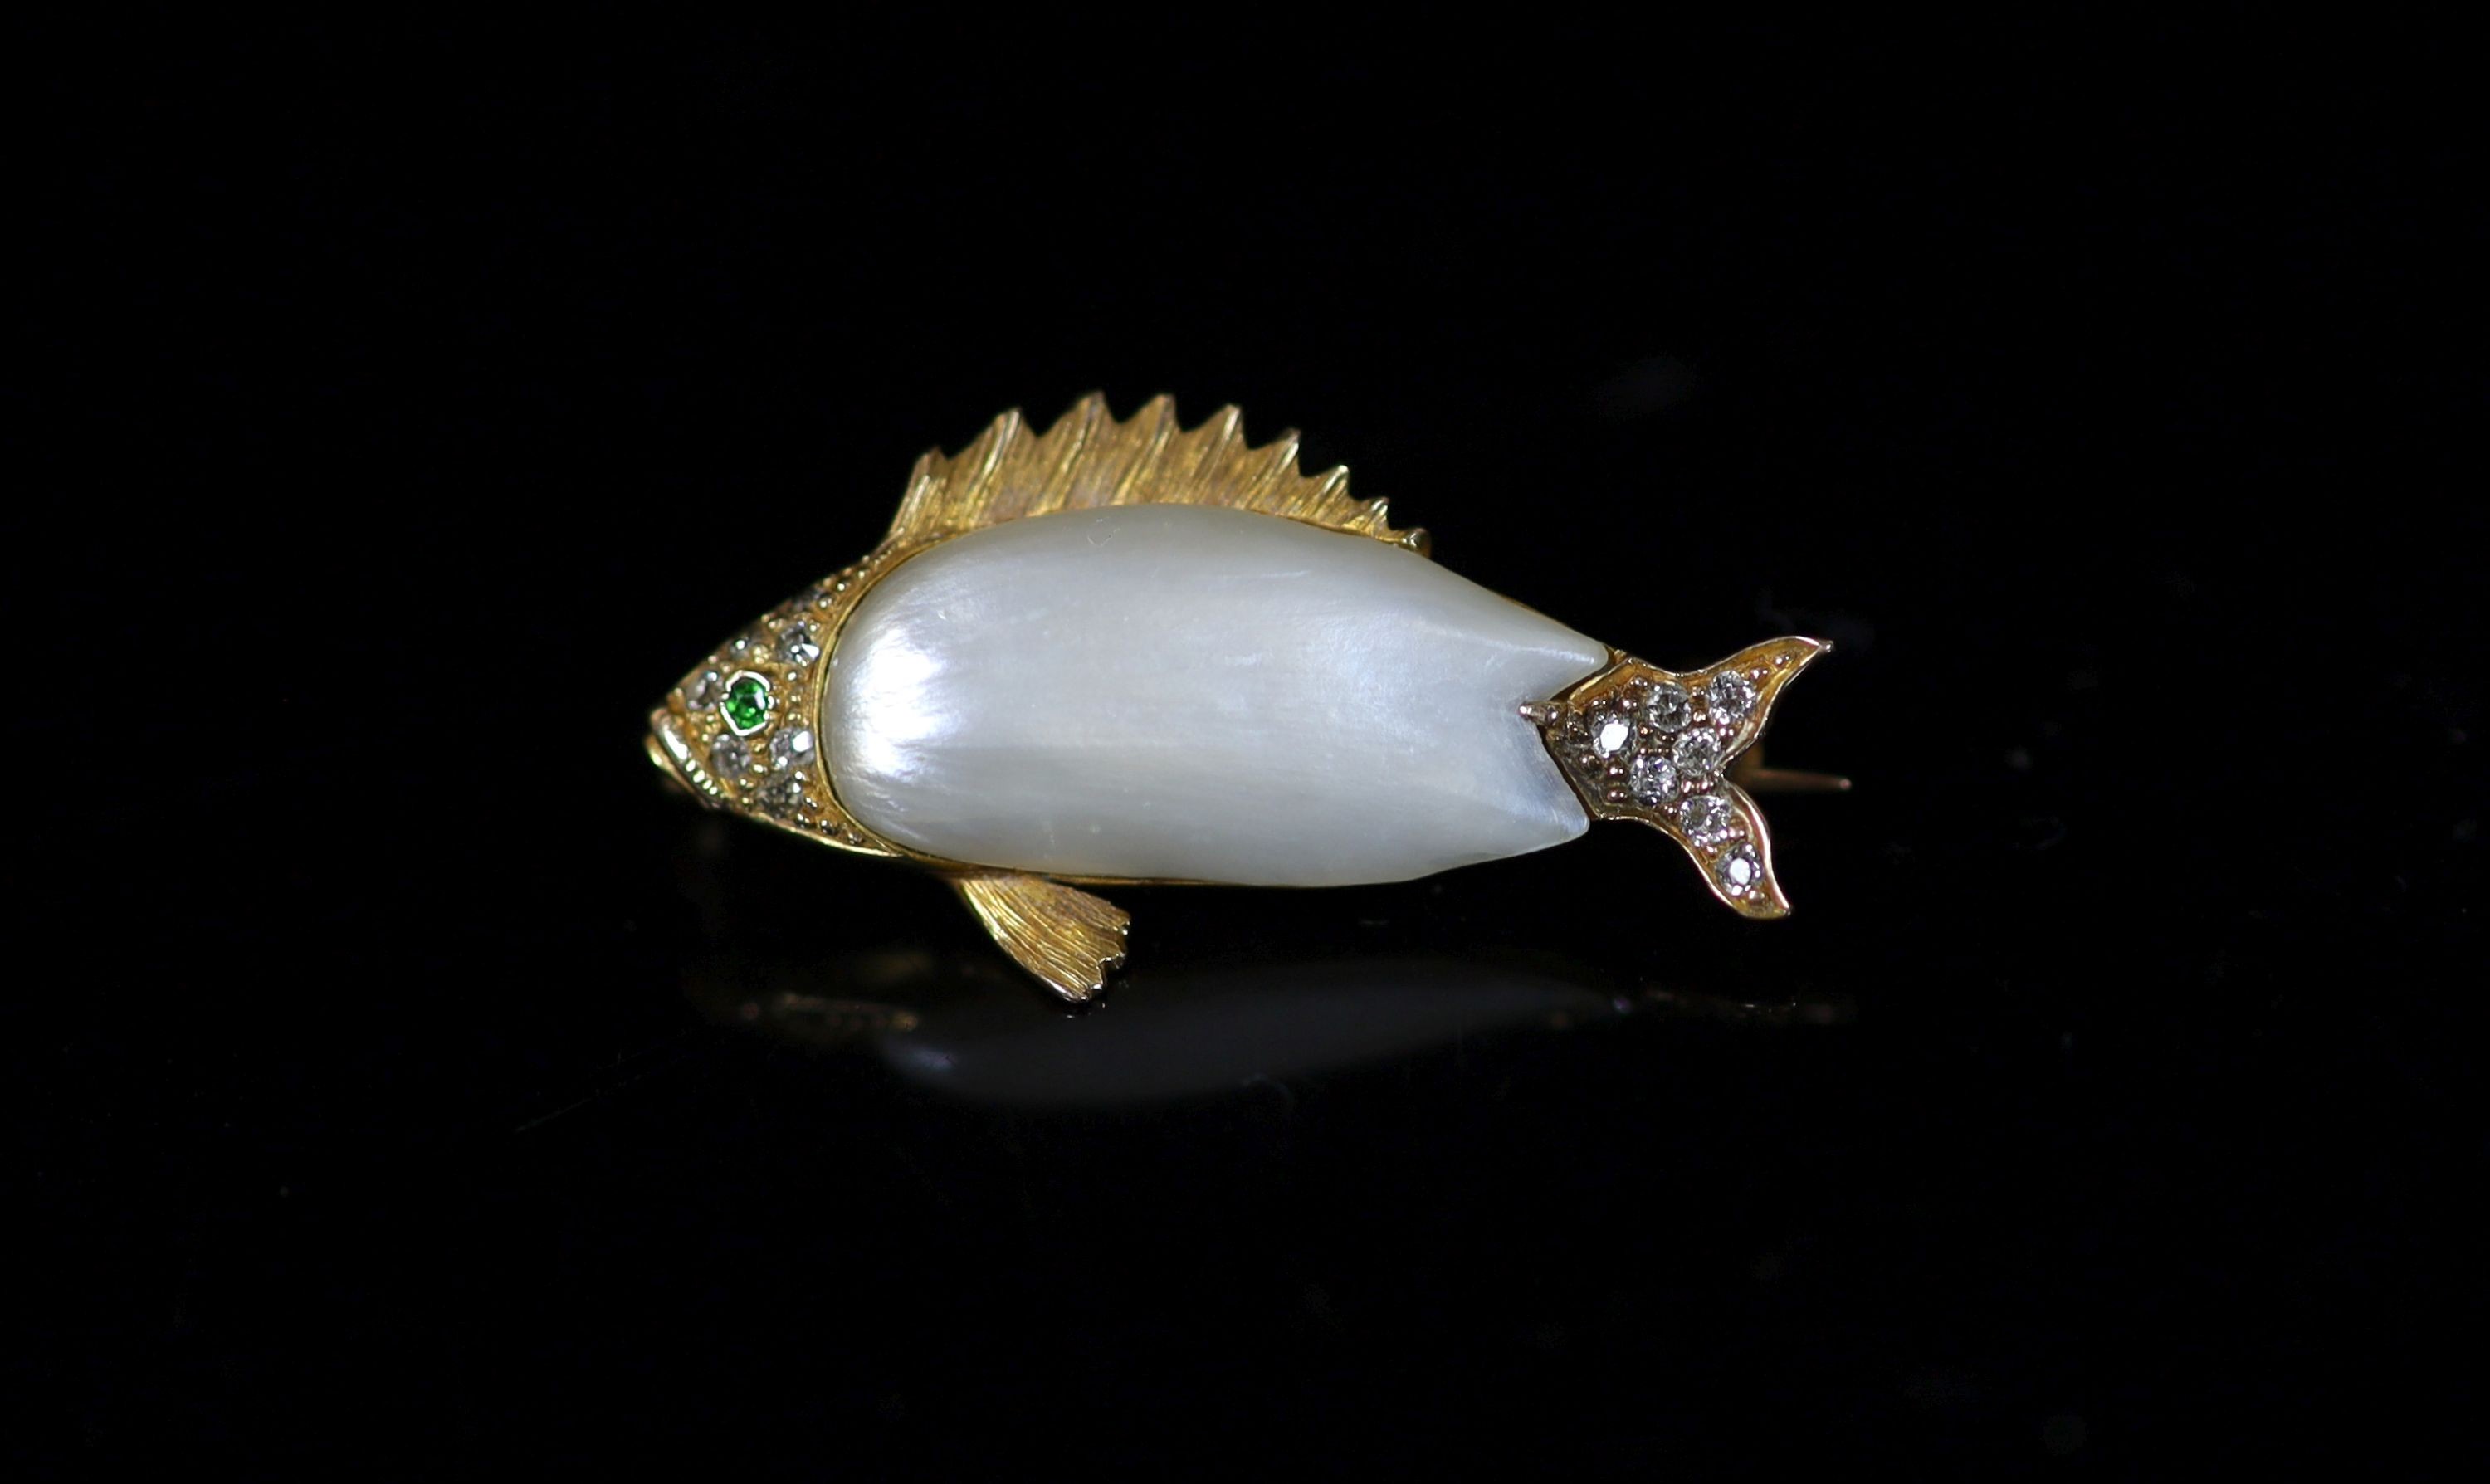 A gold, baroque pearl, garnet and diamond set brooch, modelled as a fish                                                                                                                                                    